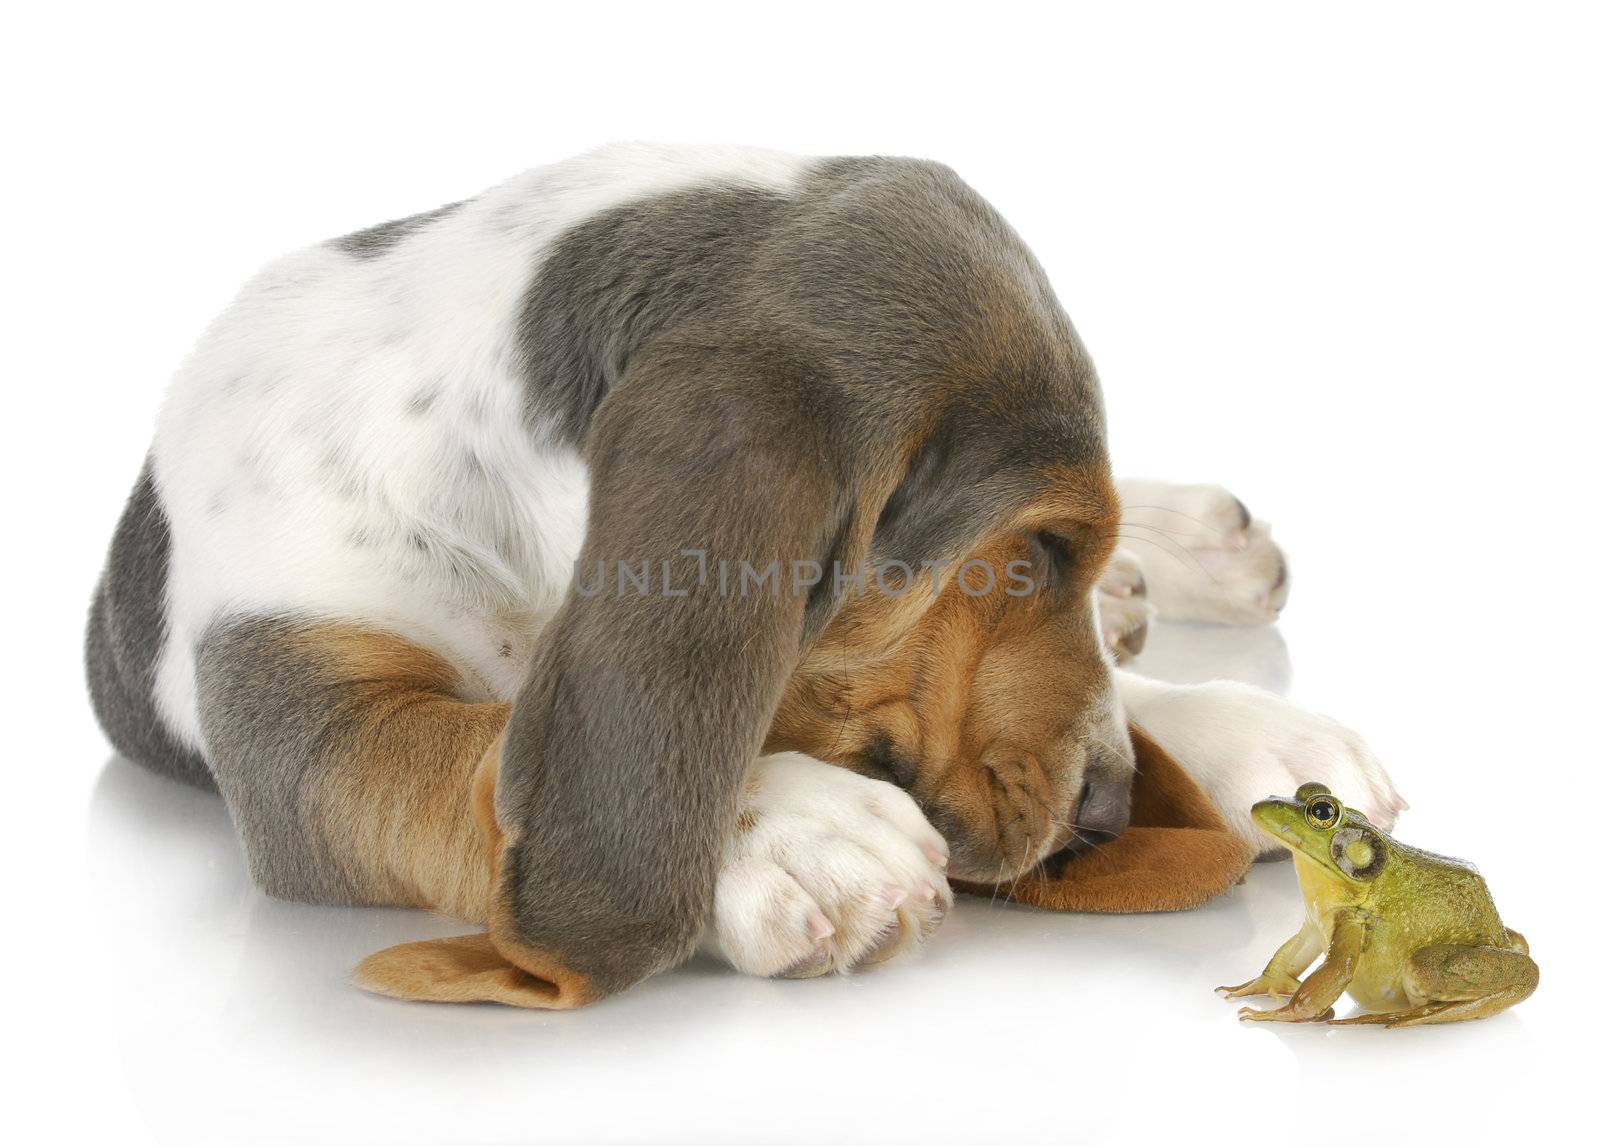 unusual friends - cute basset hound and bullfrog interacting on white background